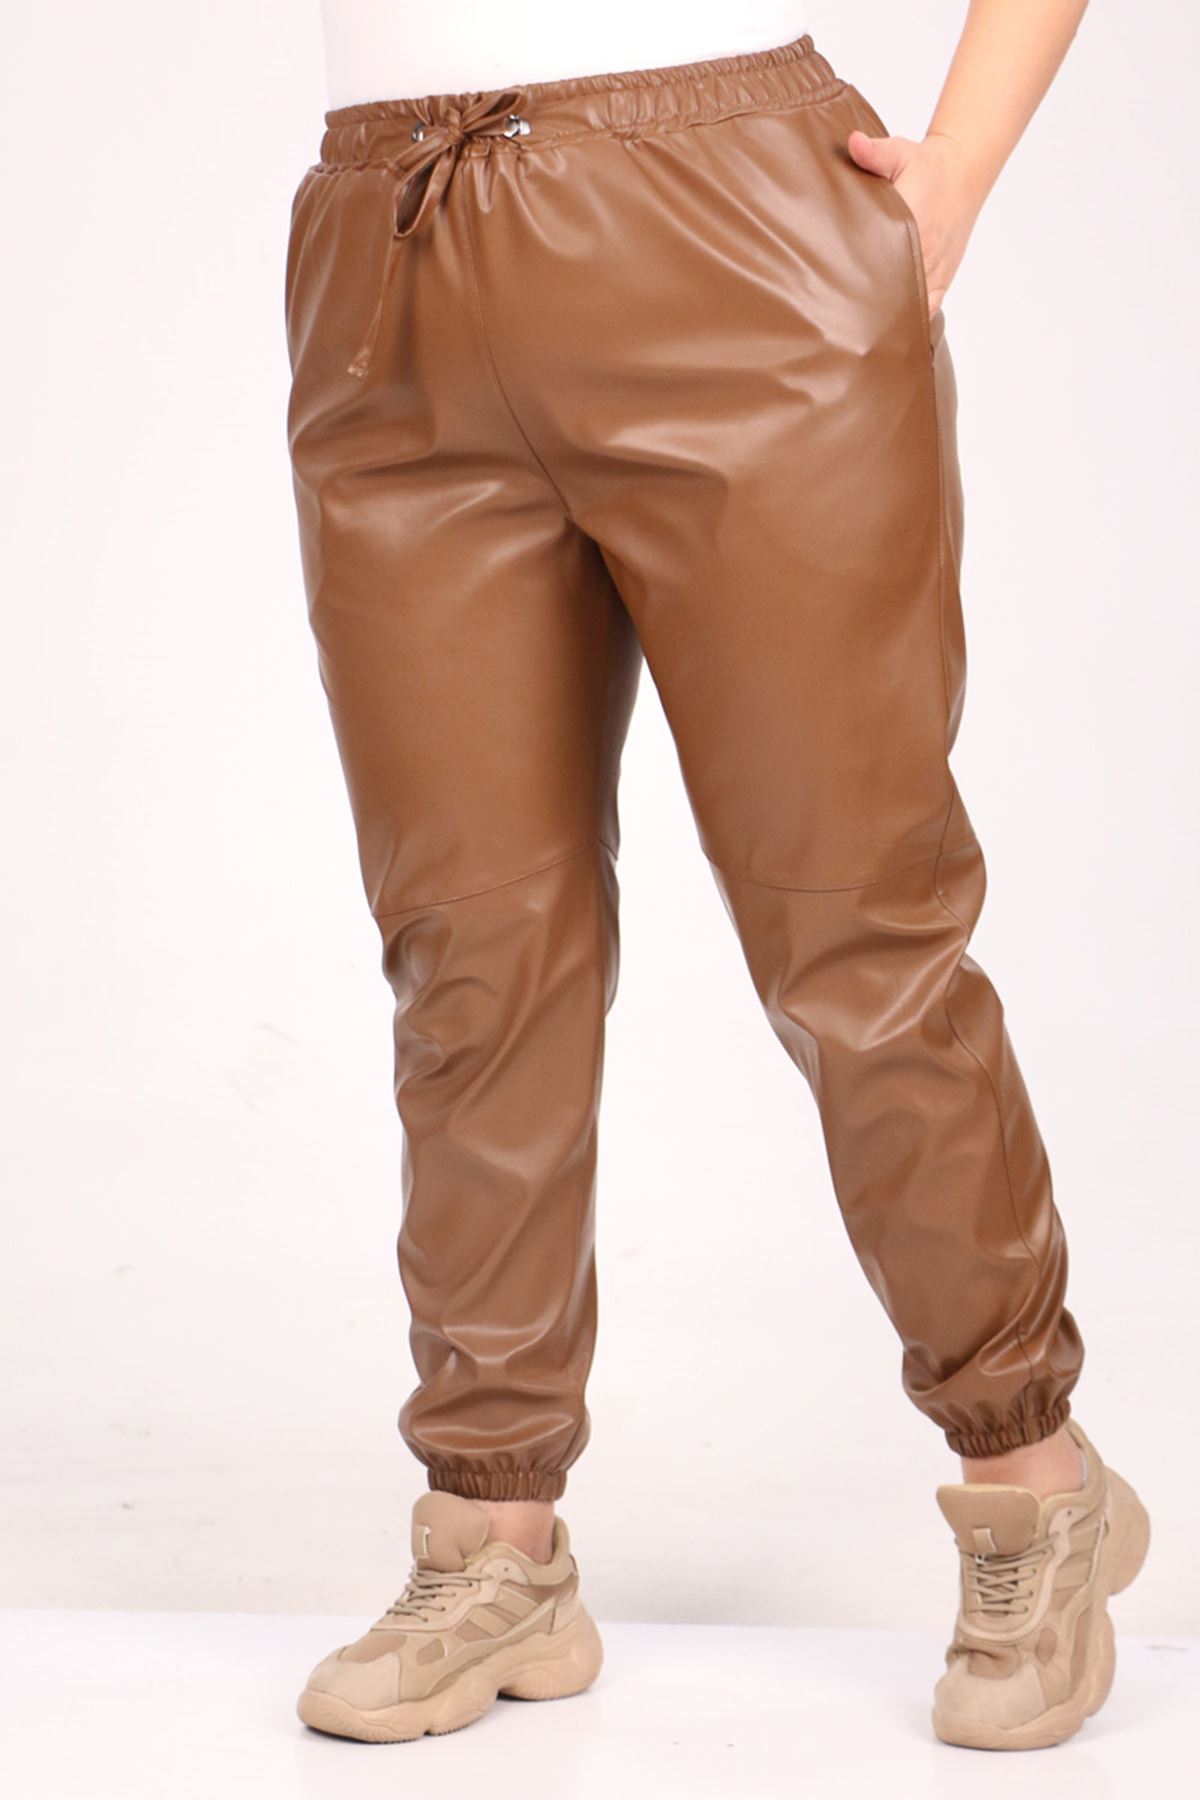 39051 Large Size Leather Trousers with Elastic Legs-Chocolate